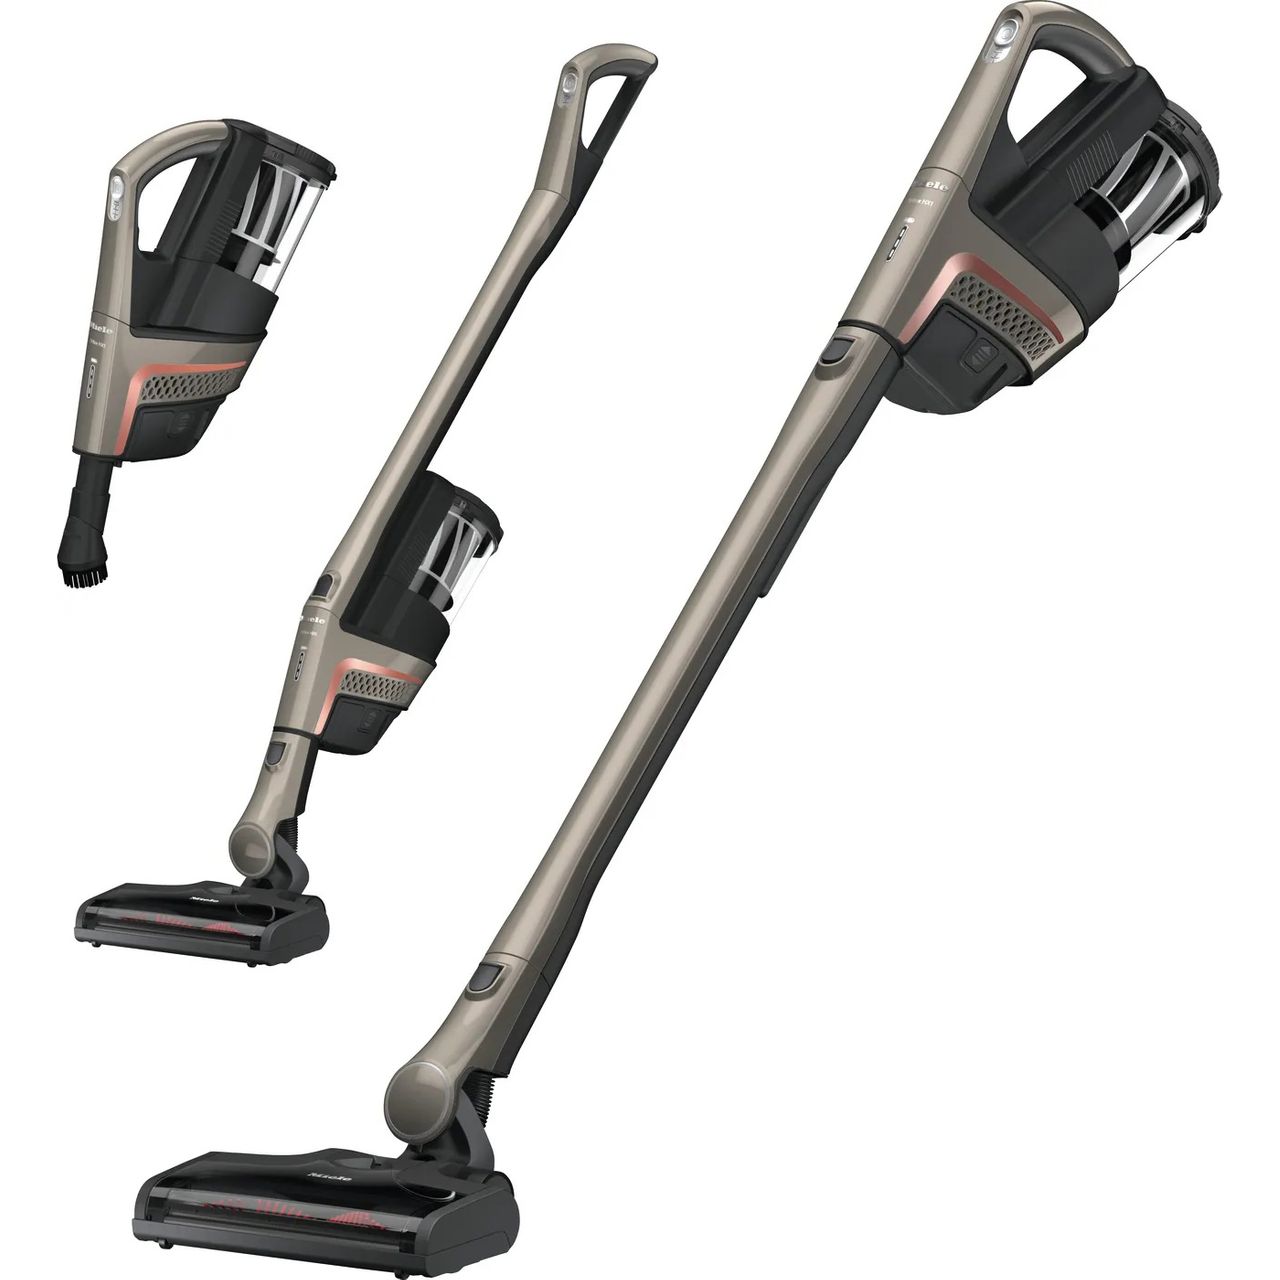 Miele Triflex HX1 Power Cordless Vacuum Cleaner with up to 120 Minutes Run Time Review